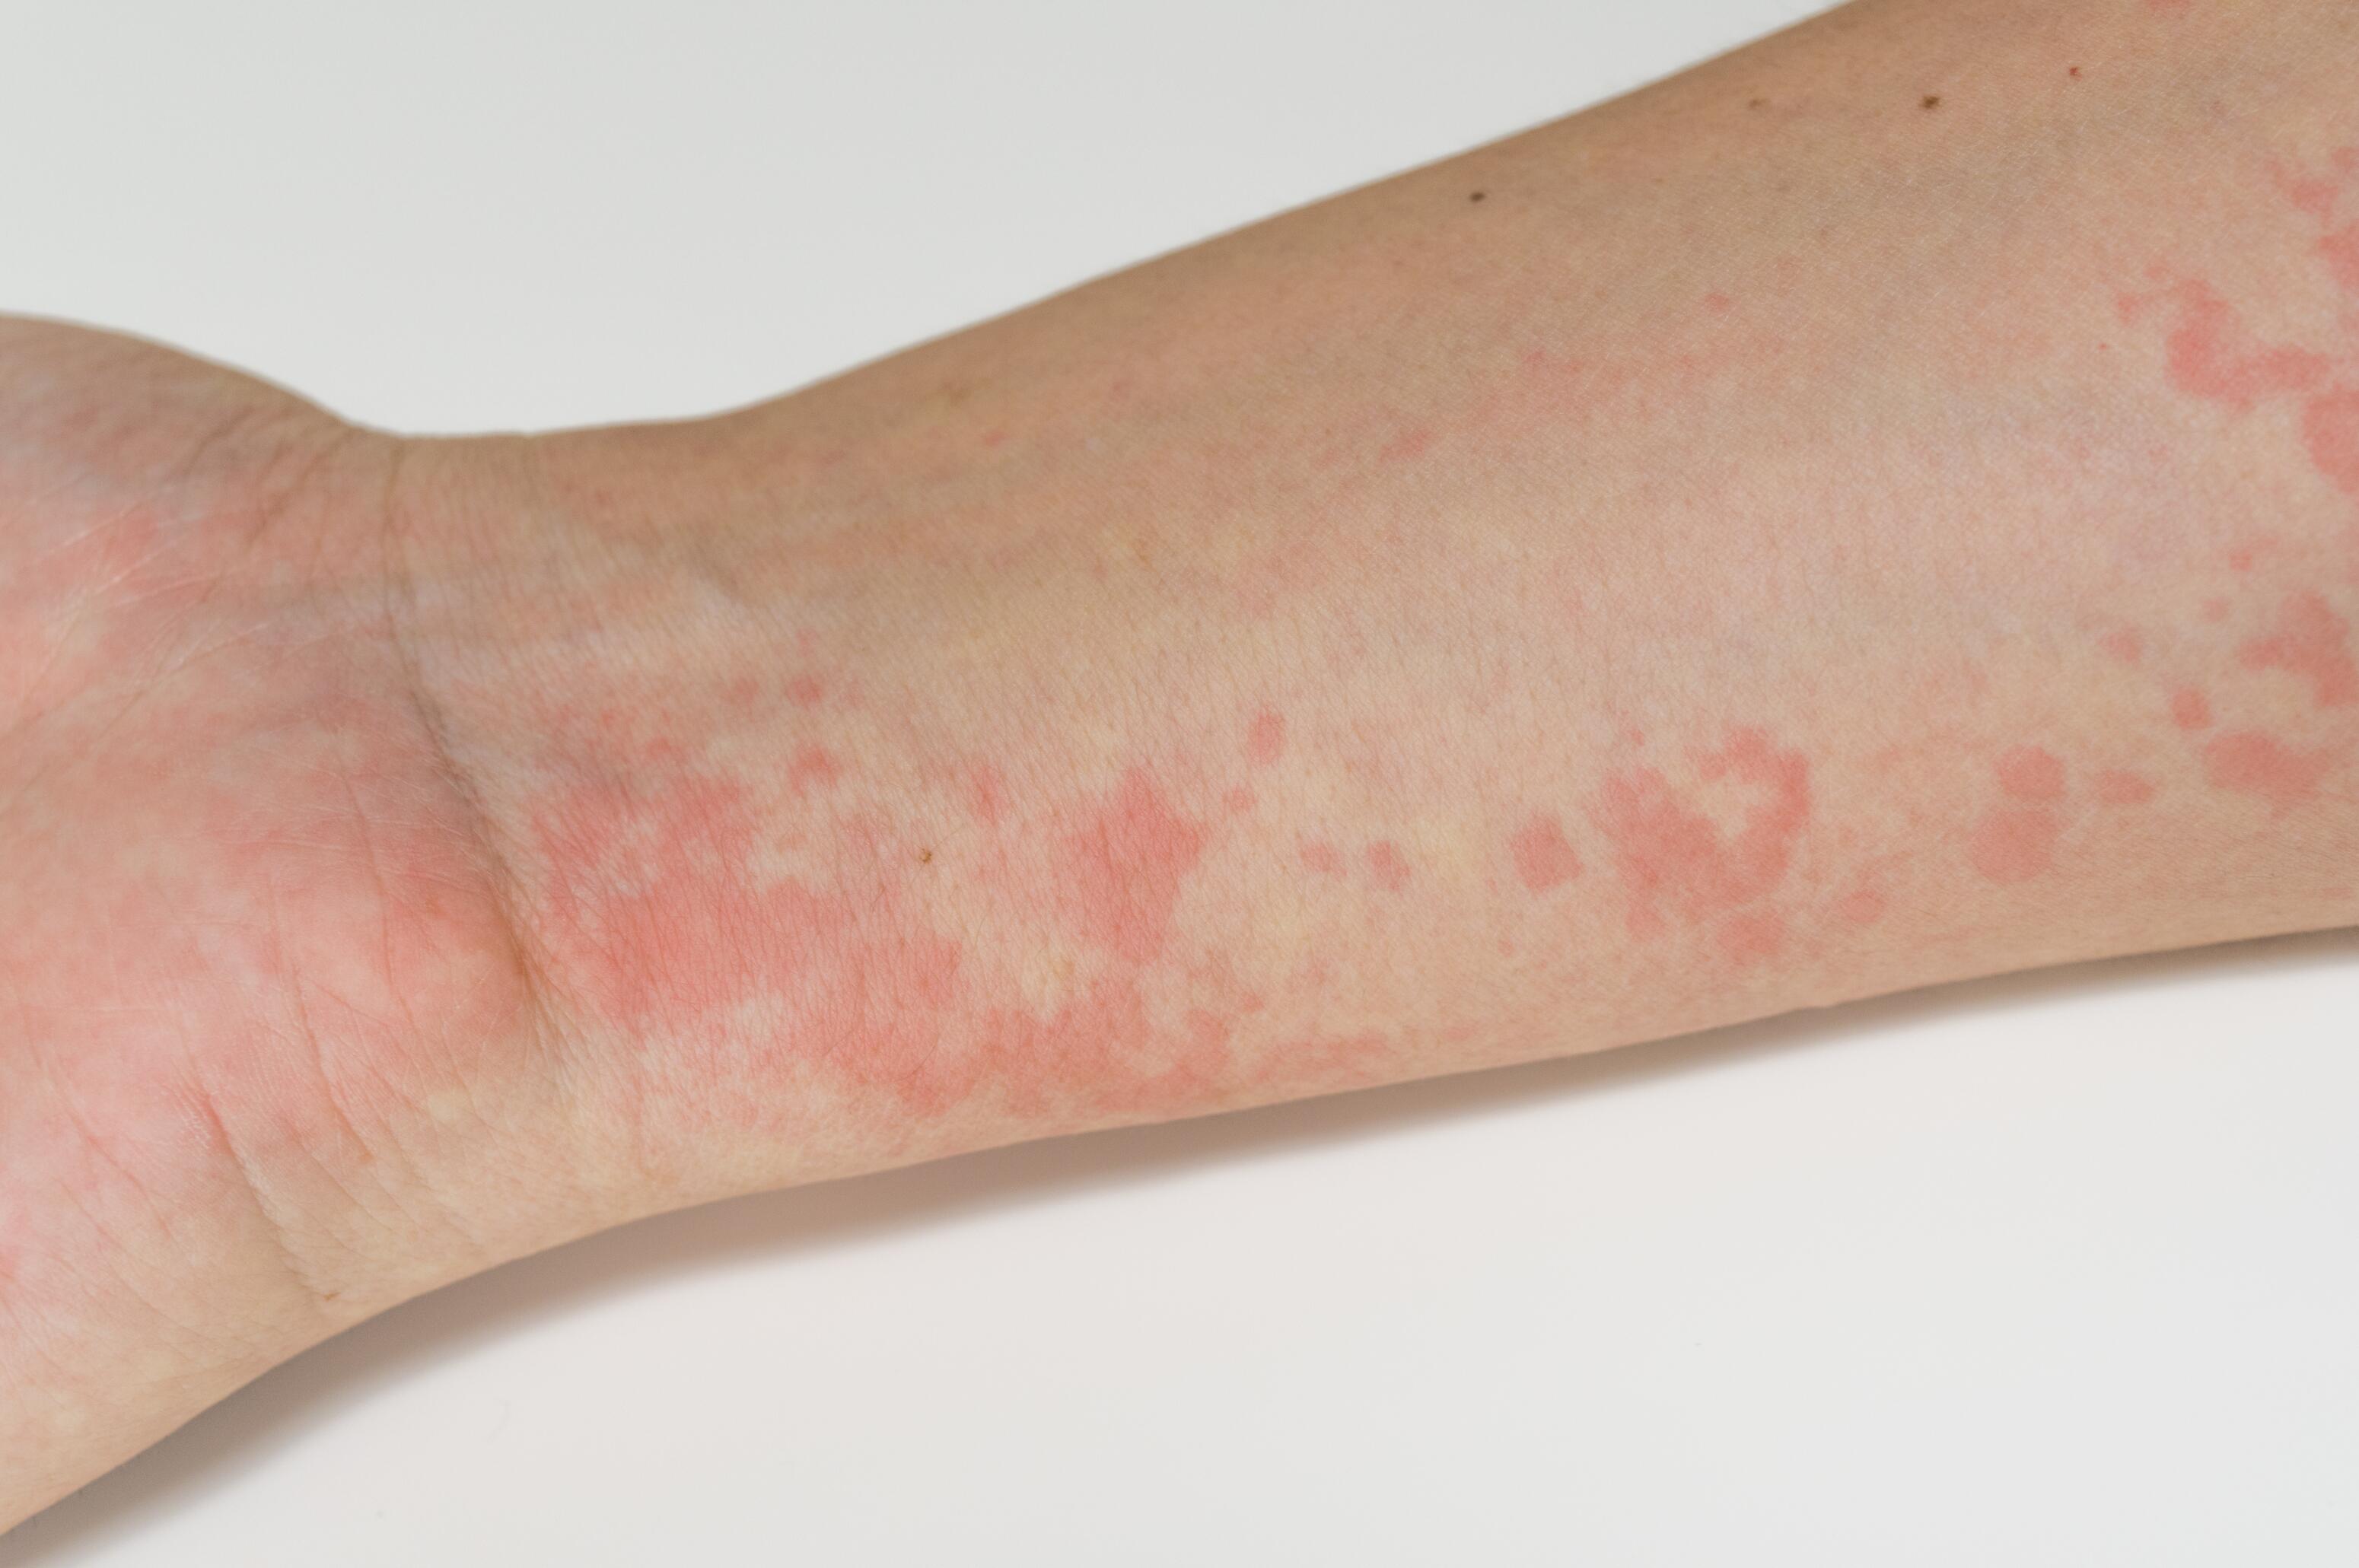 Arm with protein contact dermatitis